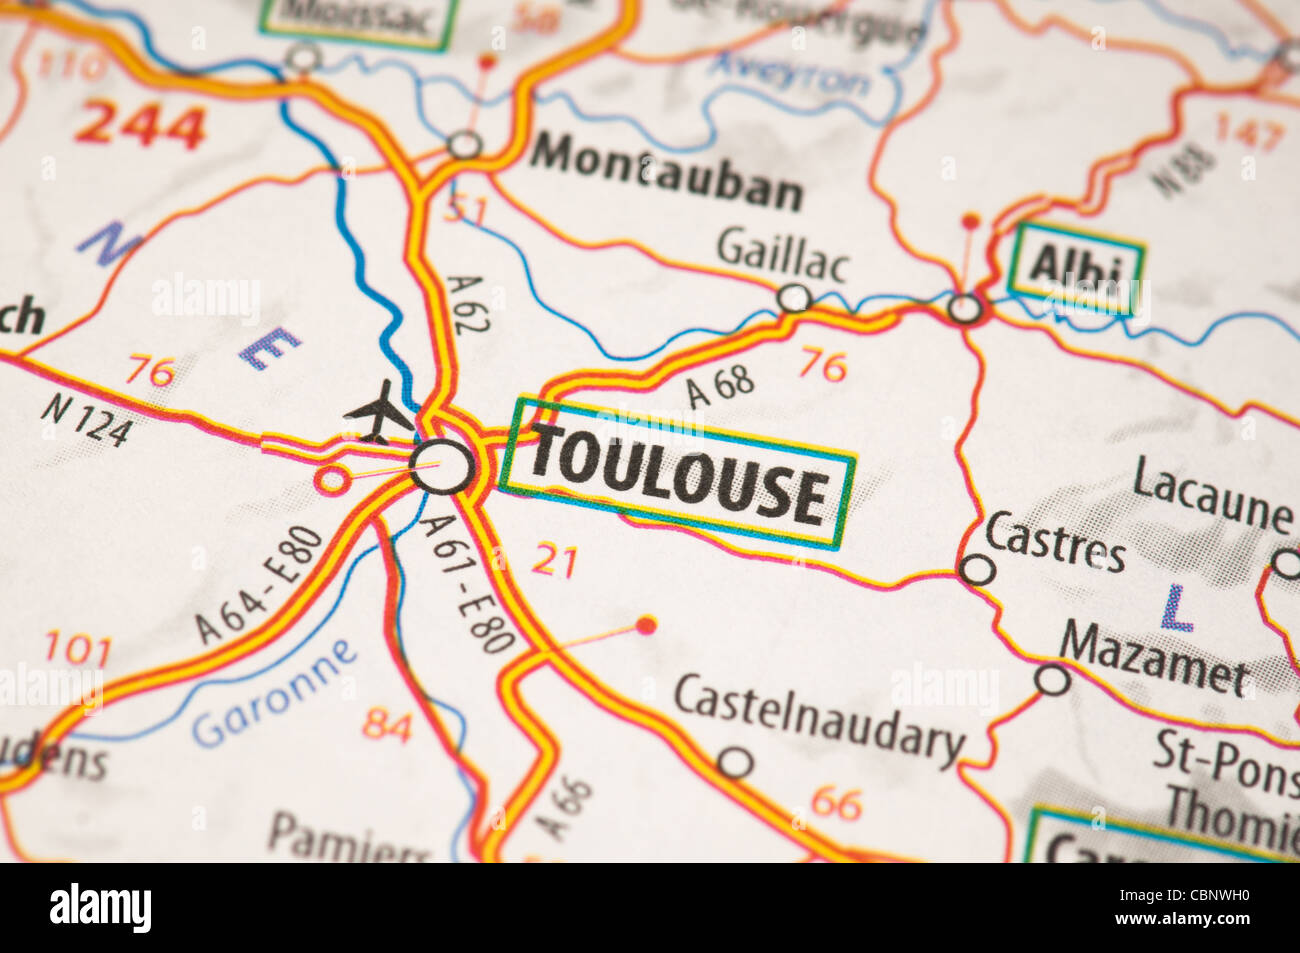 Toulouse Area Map